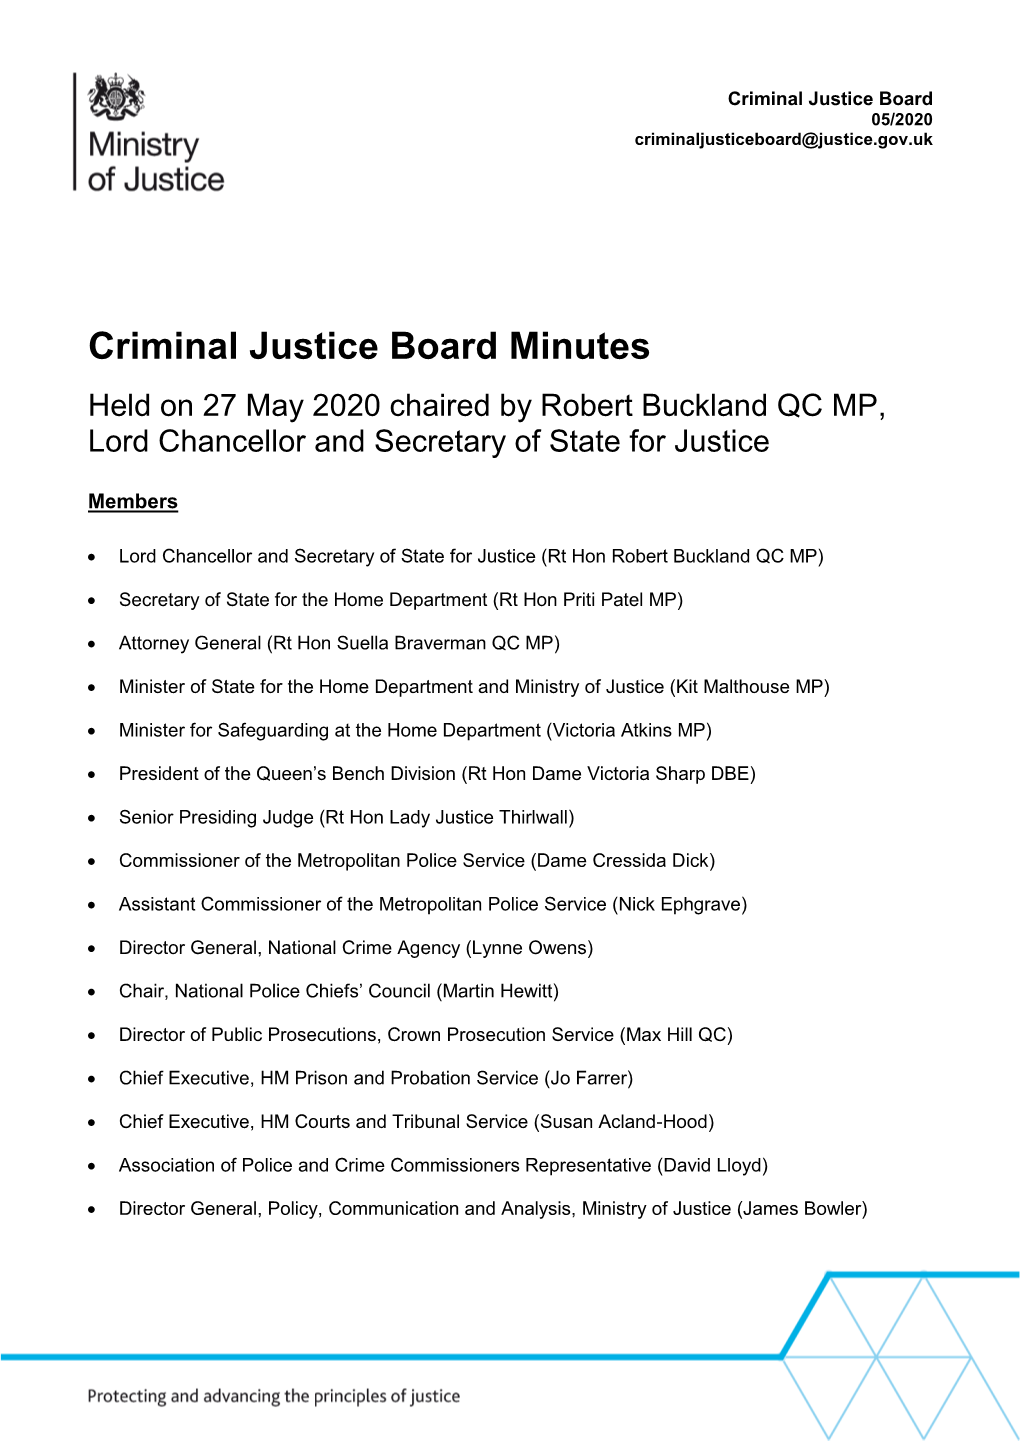 The Criminal Justice Board Minutes